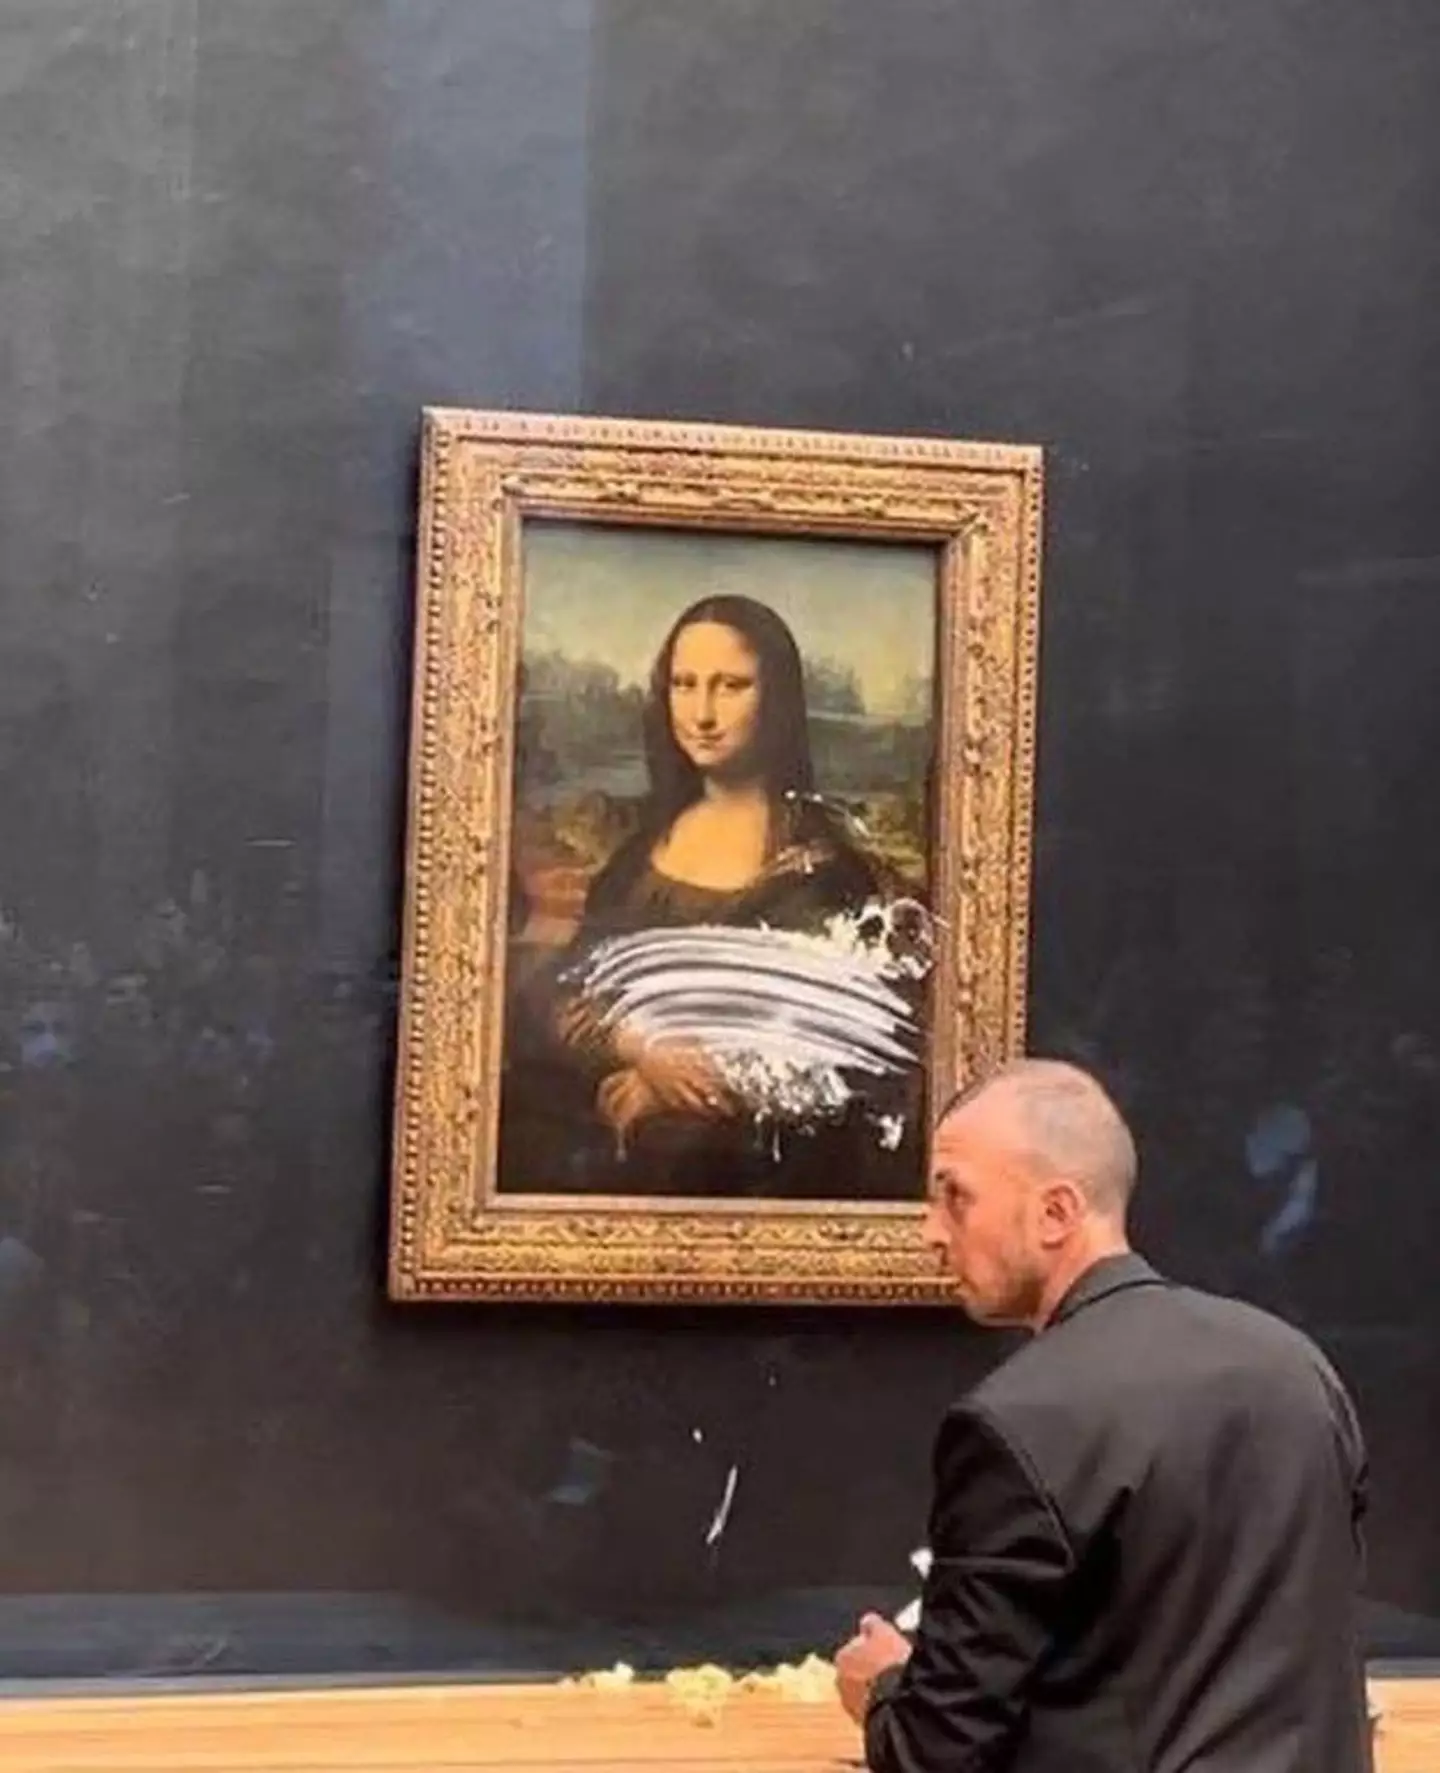 A man smeared custard pie over the Mona Lisa at the Louvre.